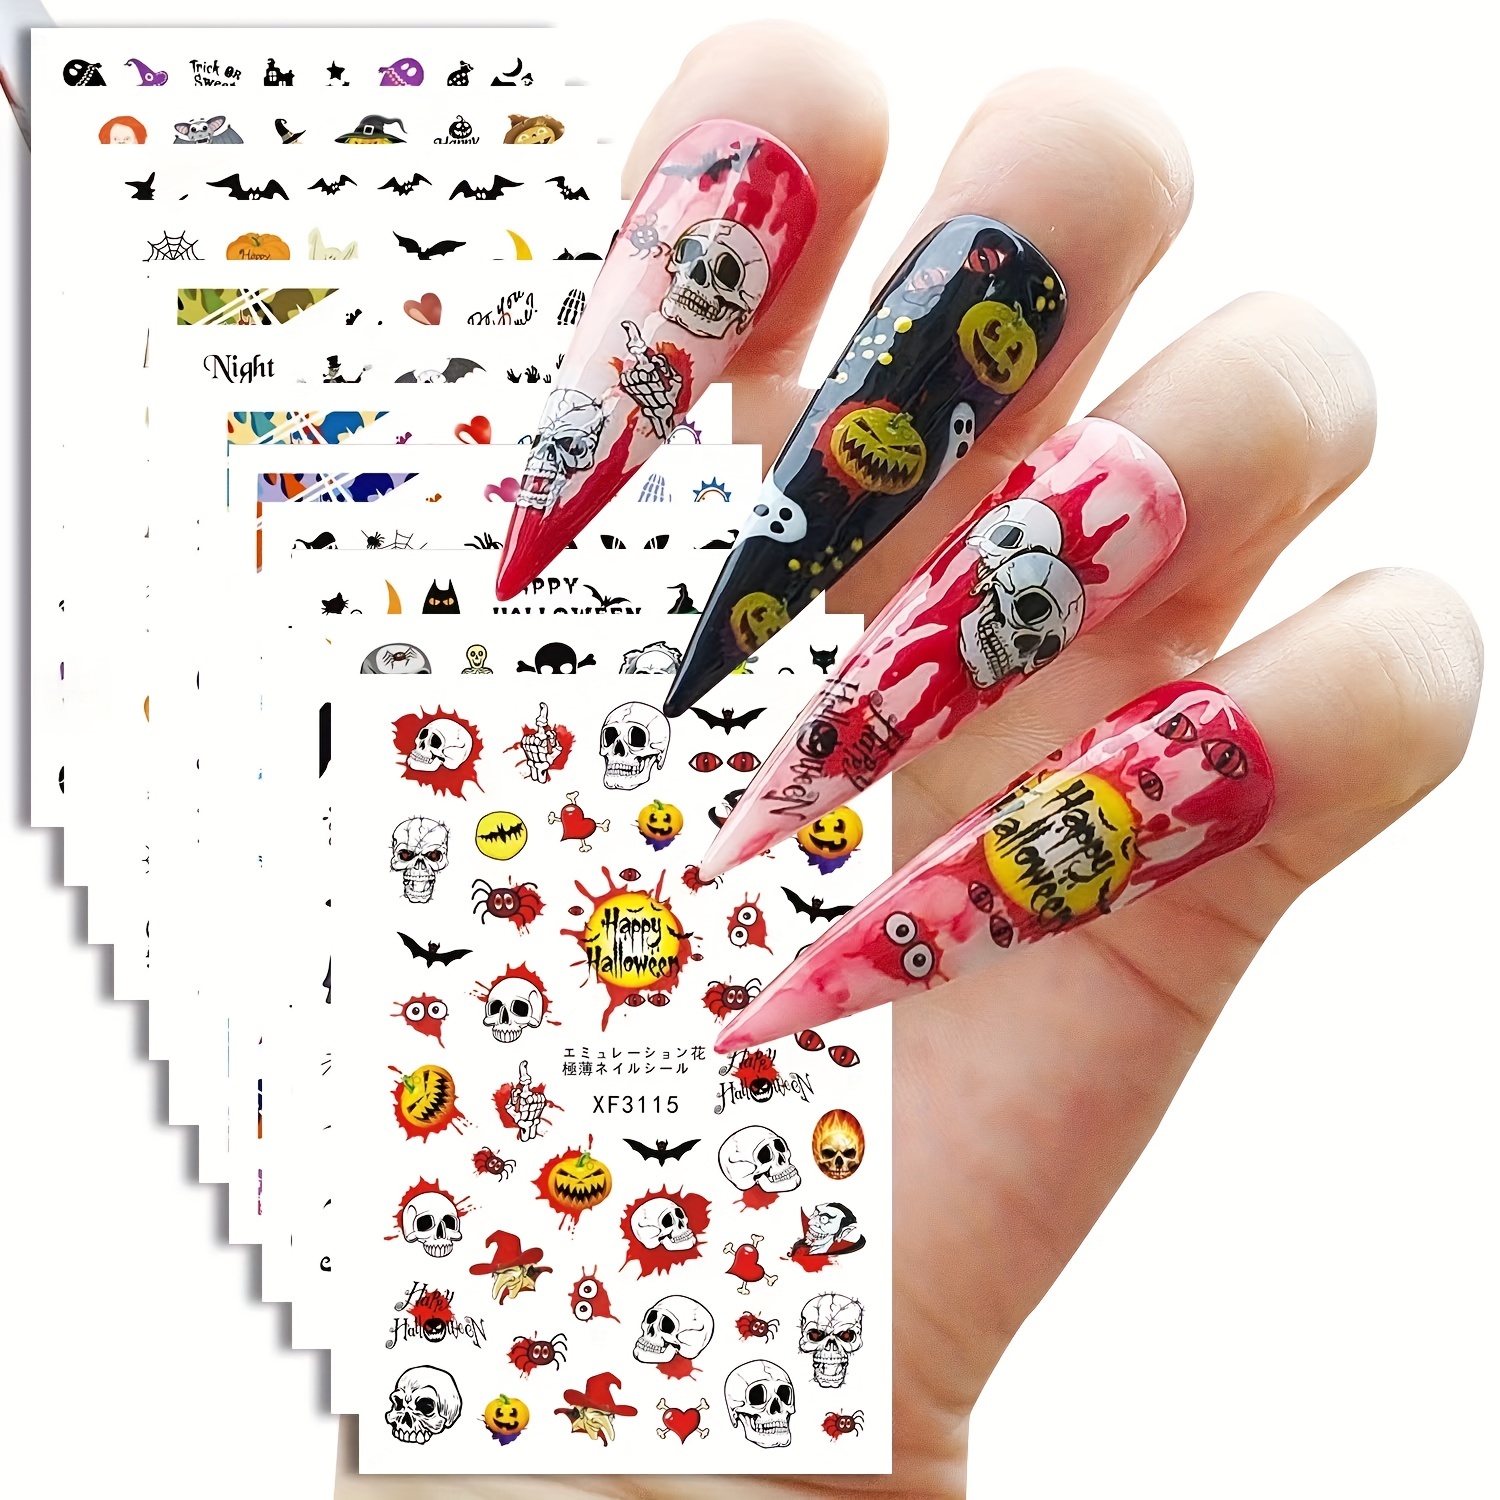  9 Sheets Halloween Nail Art Stickers Ghost 3D Nail Decals  Spider Skull Scary Flame Scar Bloody Nail Designs Rose Bones Horror Eyes  Nail Art Supplies Nail Decorations Accessories for Women 